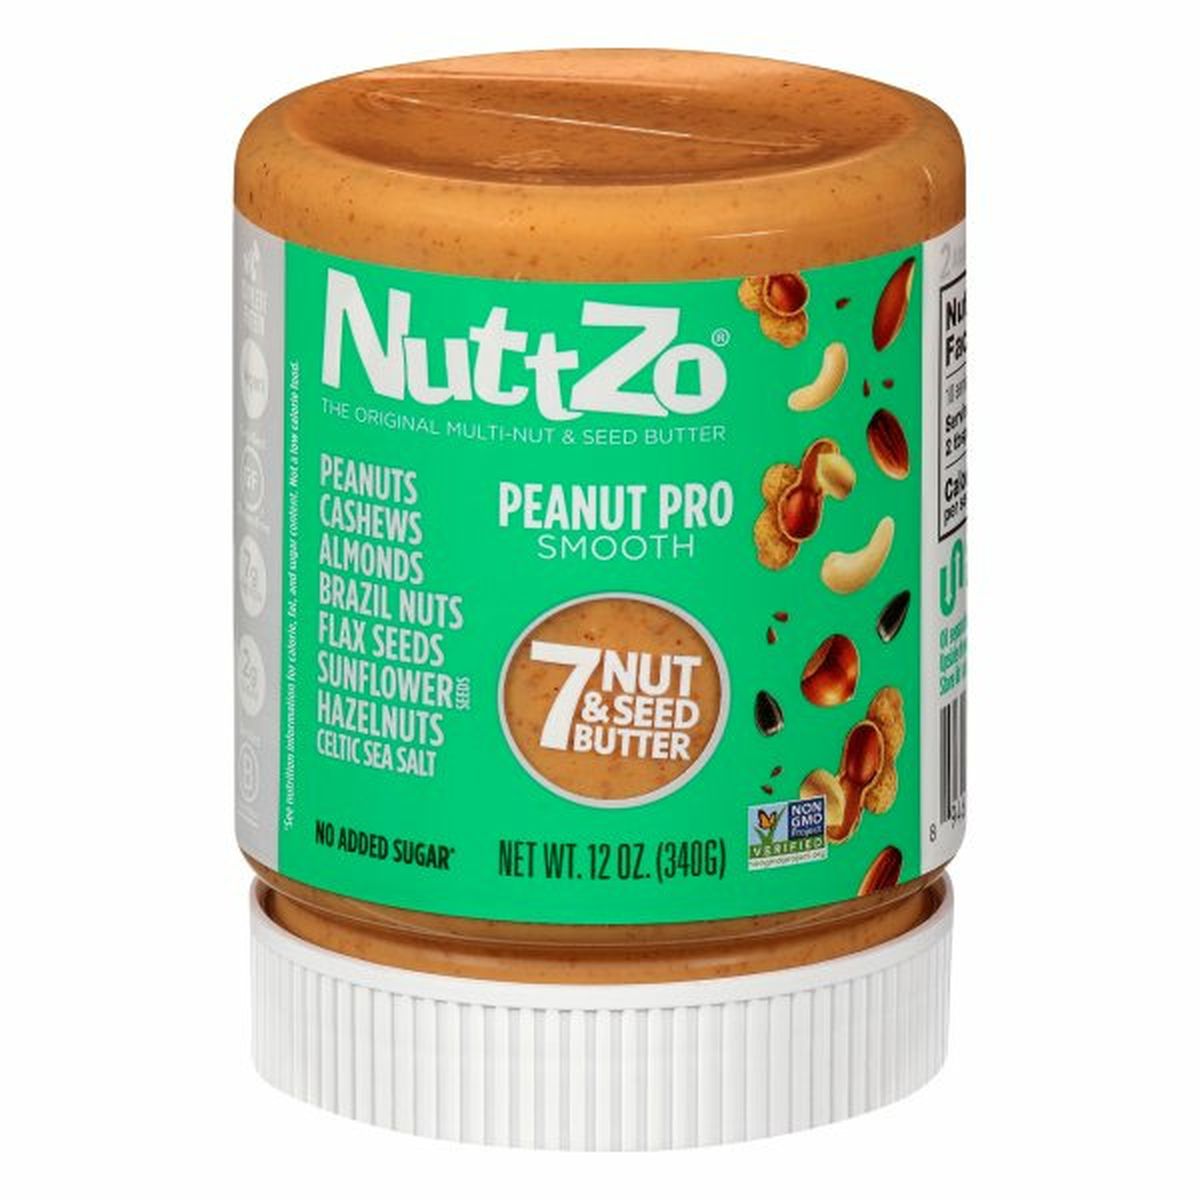 Calories in NuttZo 7 Nut & Seed Butter, Peanut Pro, Smooth